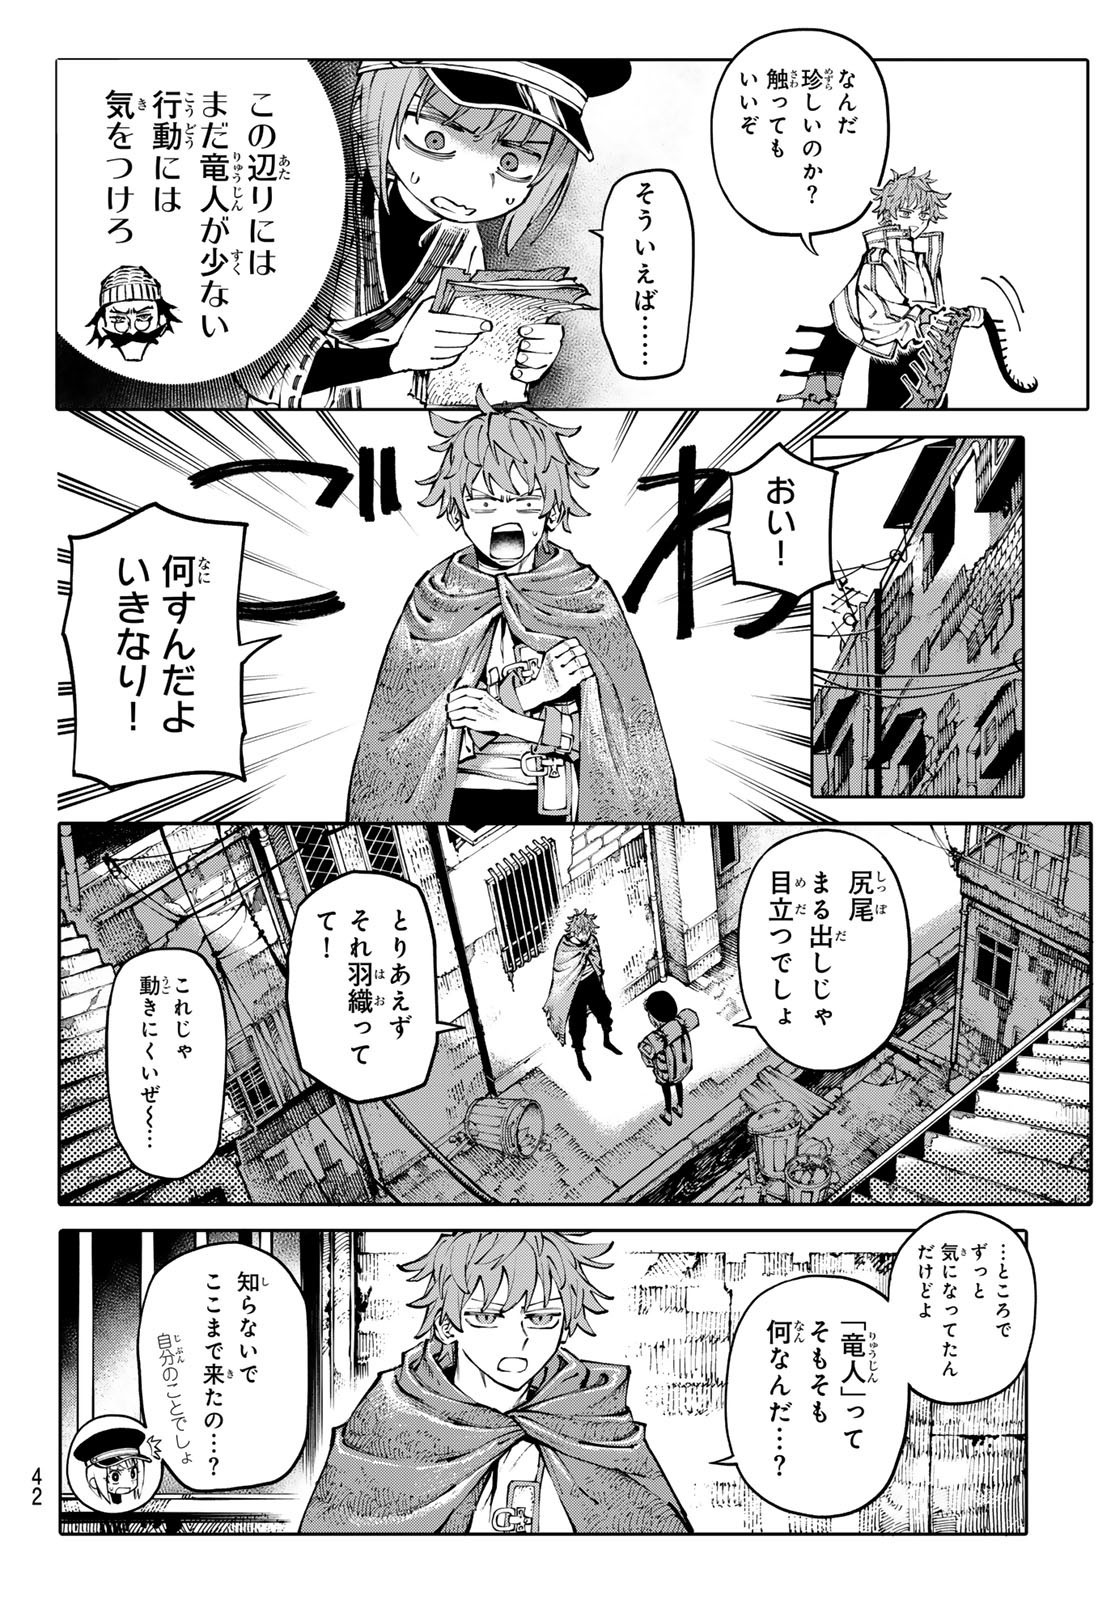 Weekly Shōnen Magazine - 週刊少年マガジン - Chapter 2024-34 - Page 39